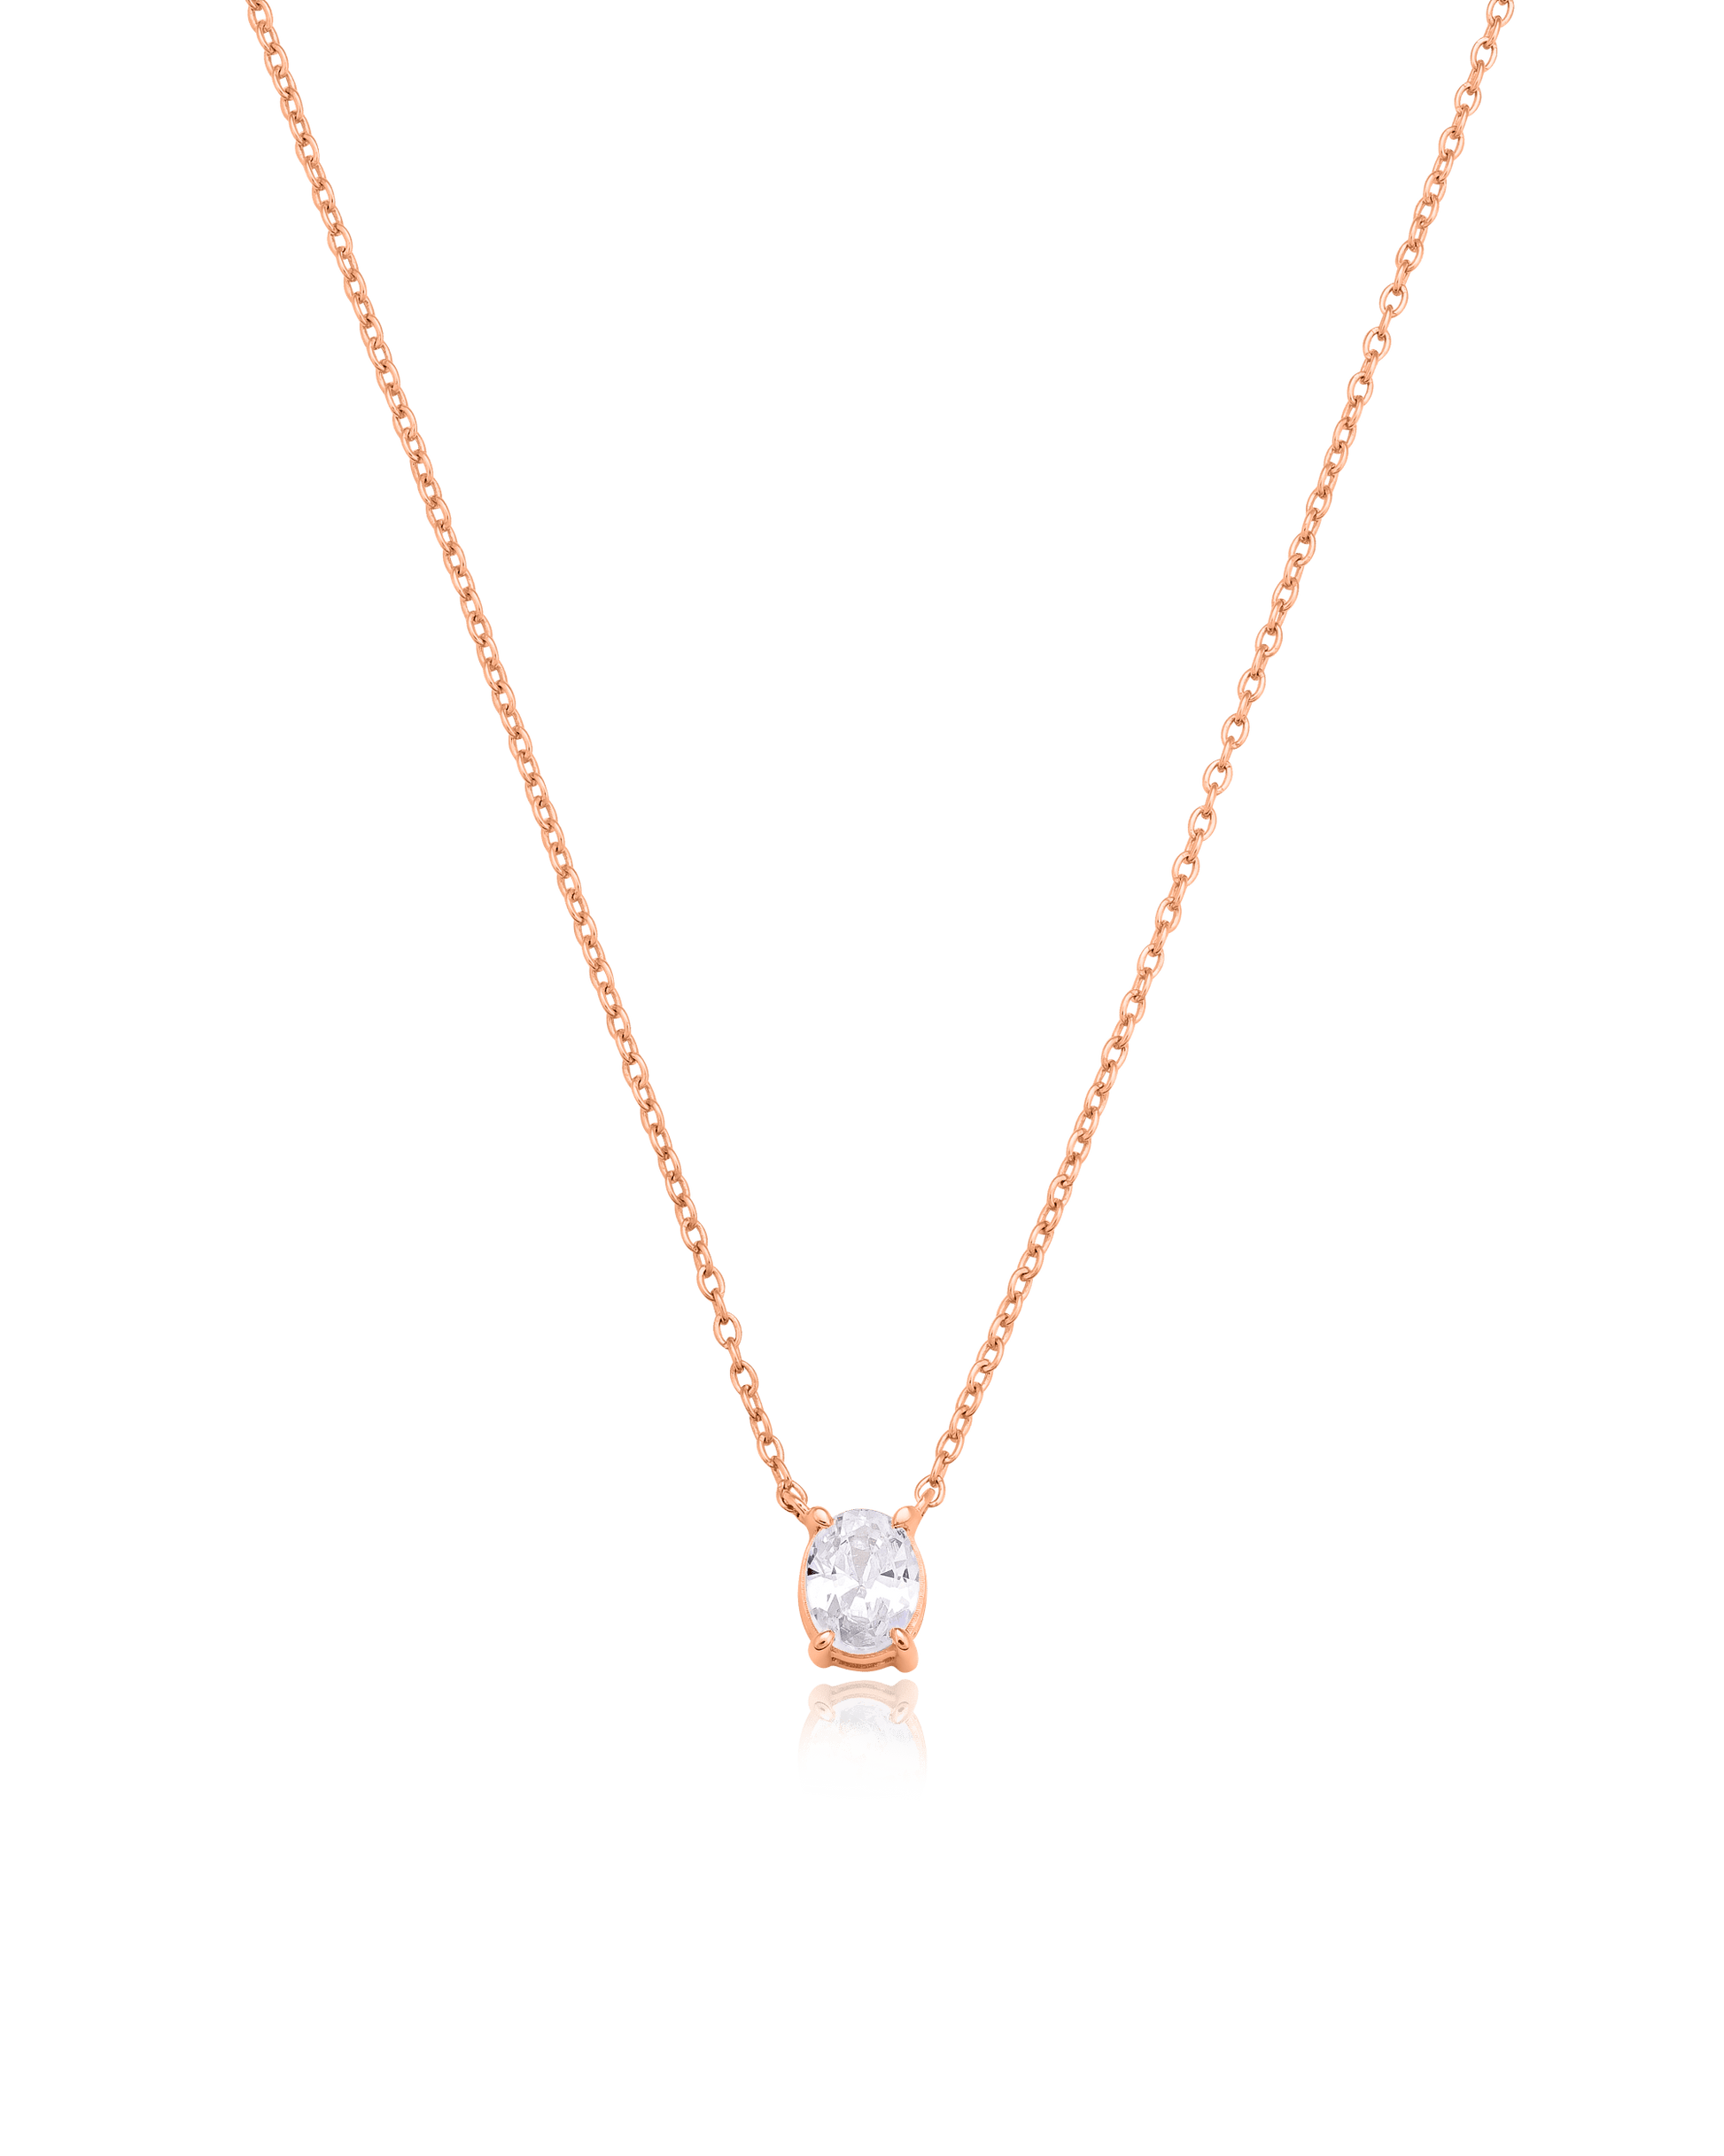 Oval Solitaire Diamond Necklace - 925 Sterling Silver Necklaces magal-dev 